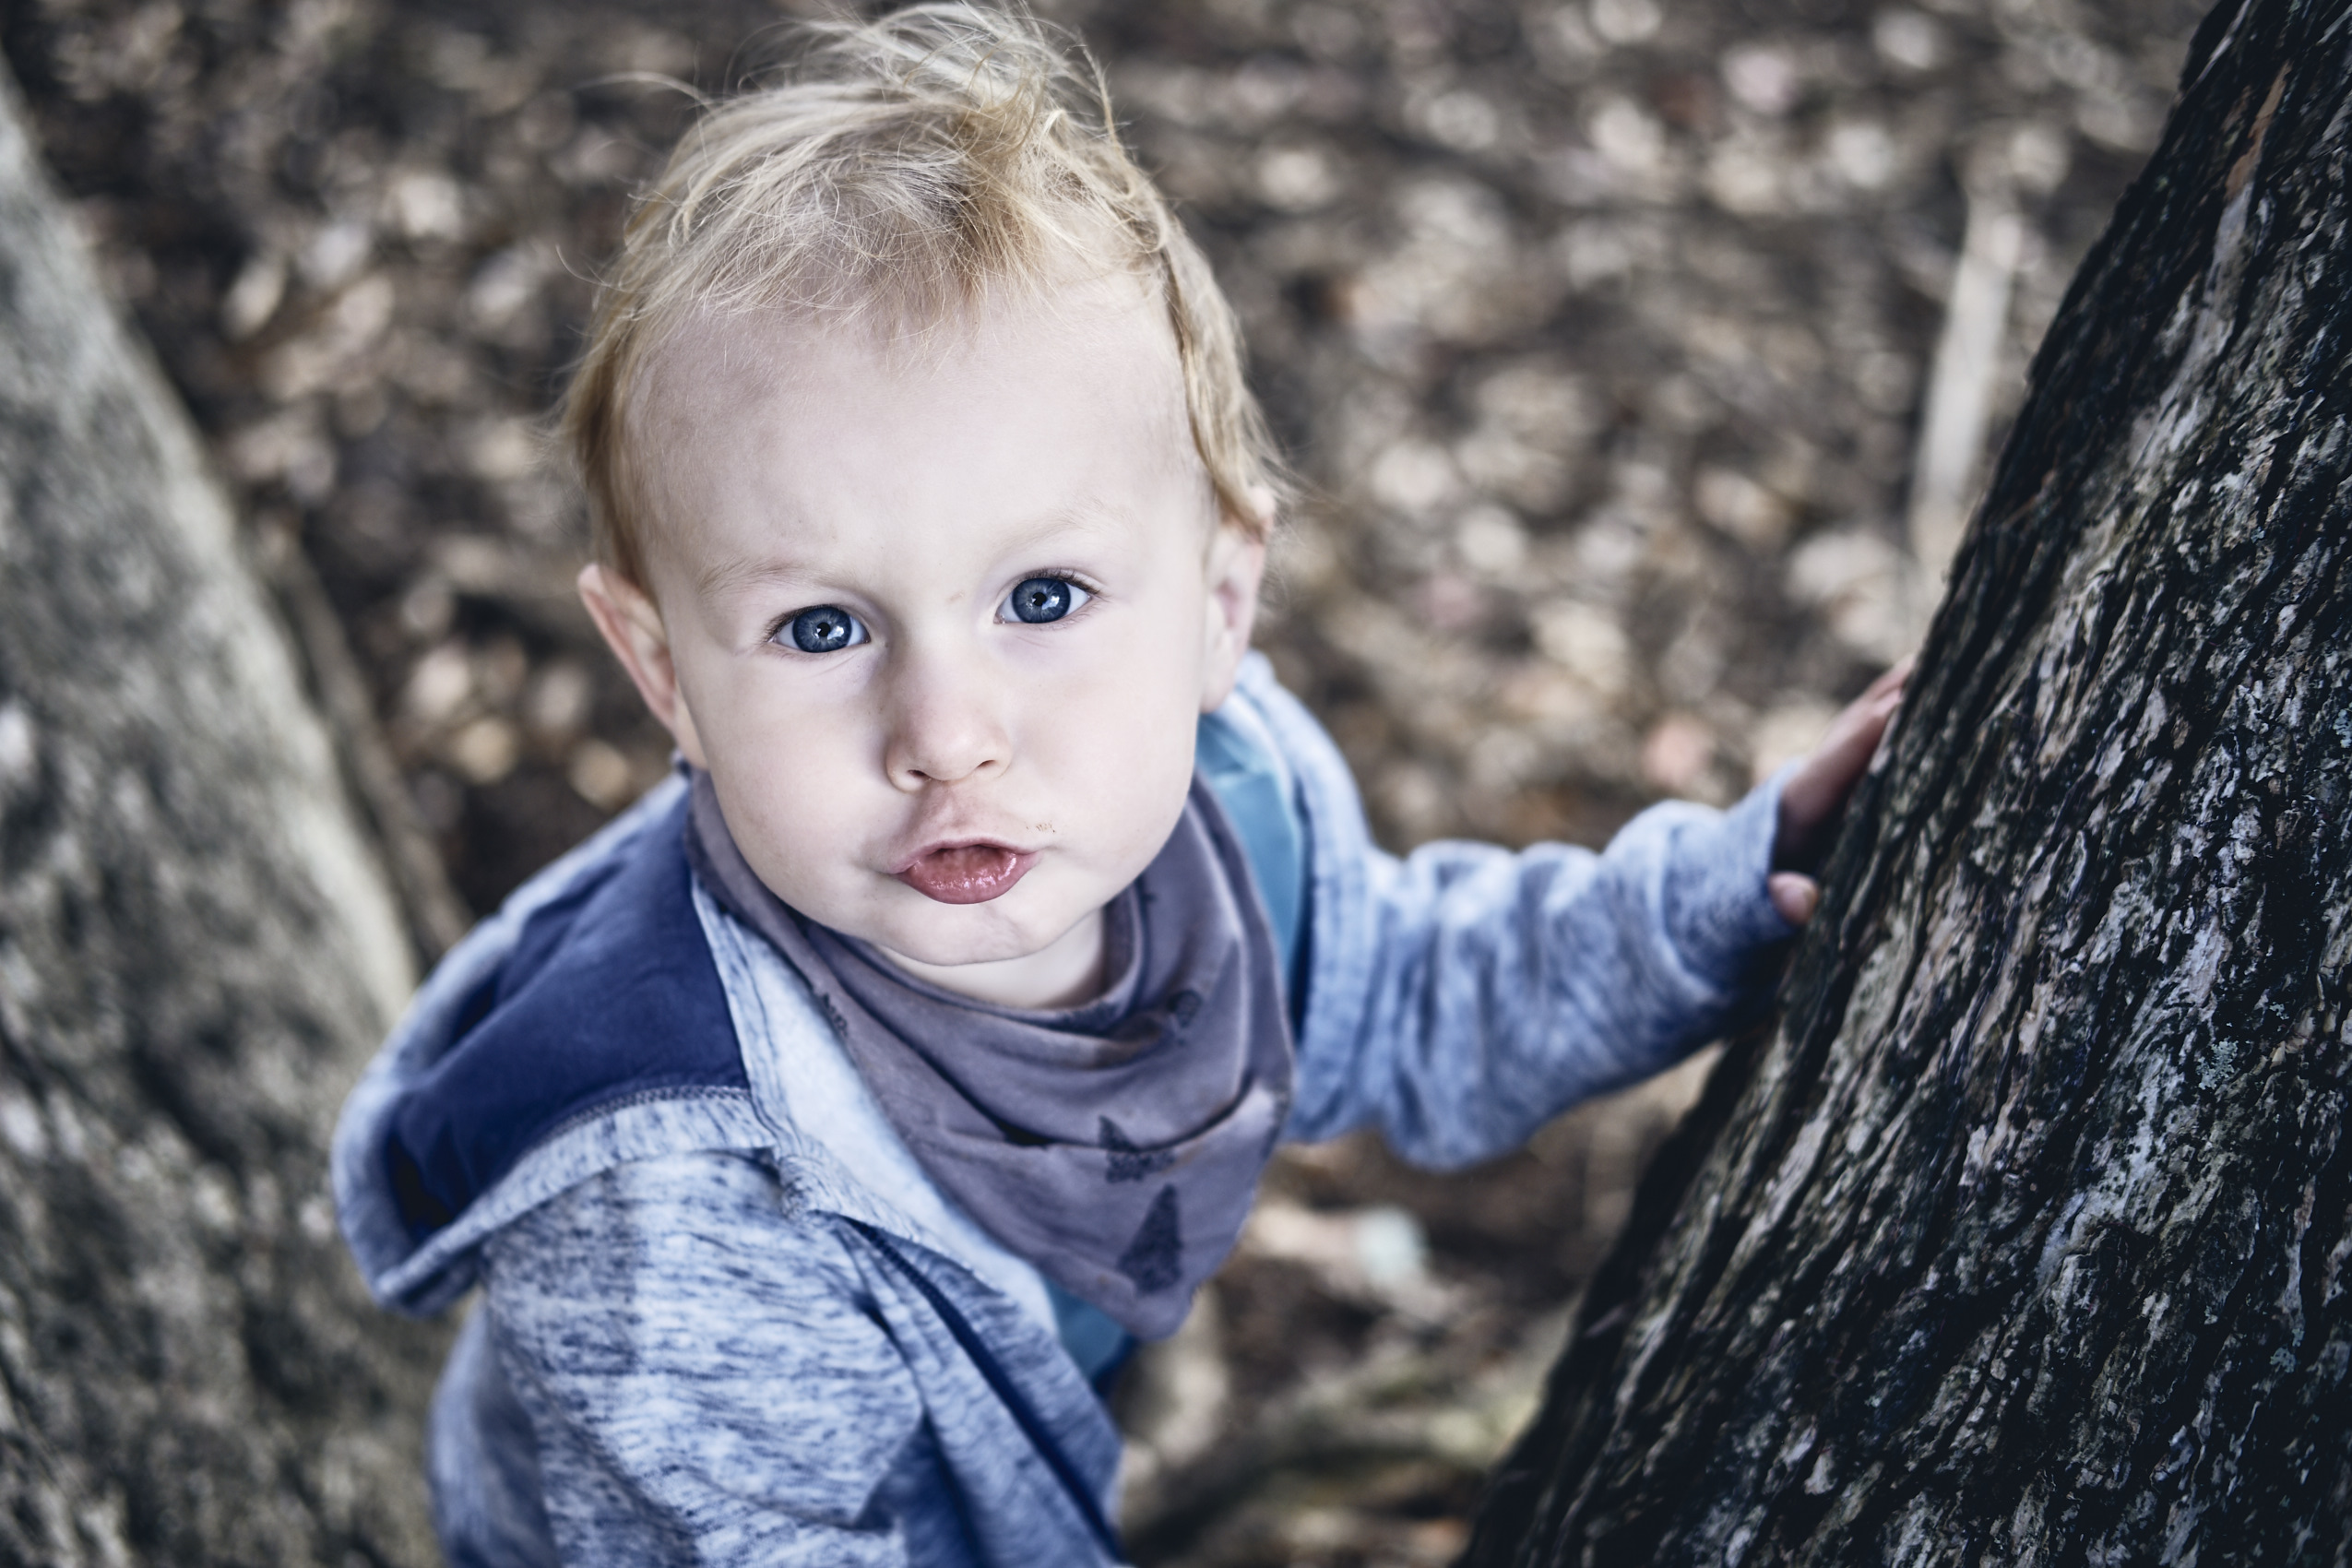 Lockdown • Blue-Eyed Toddler Playing at Park • Lifestyle & Portrait Photography